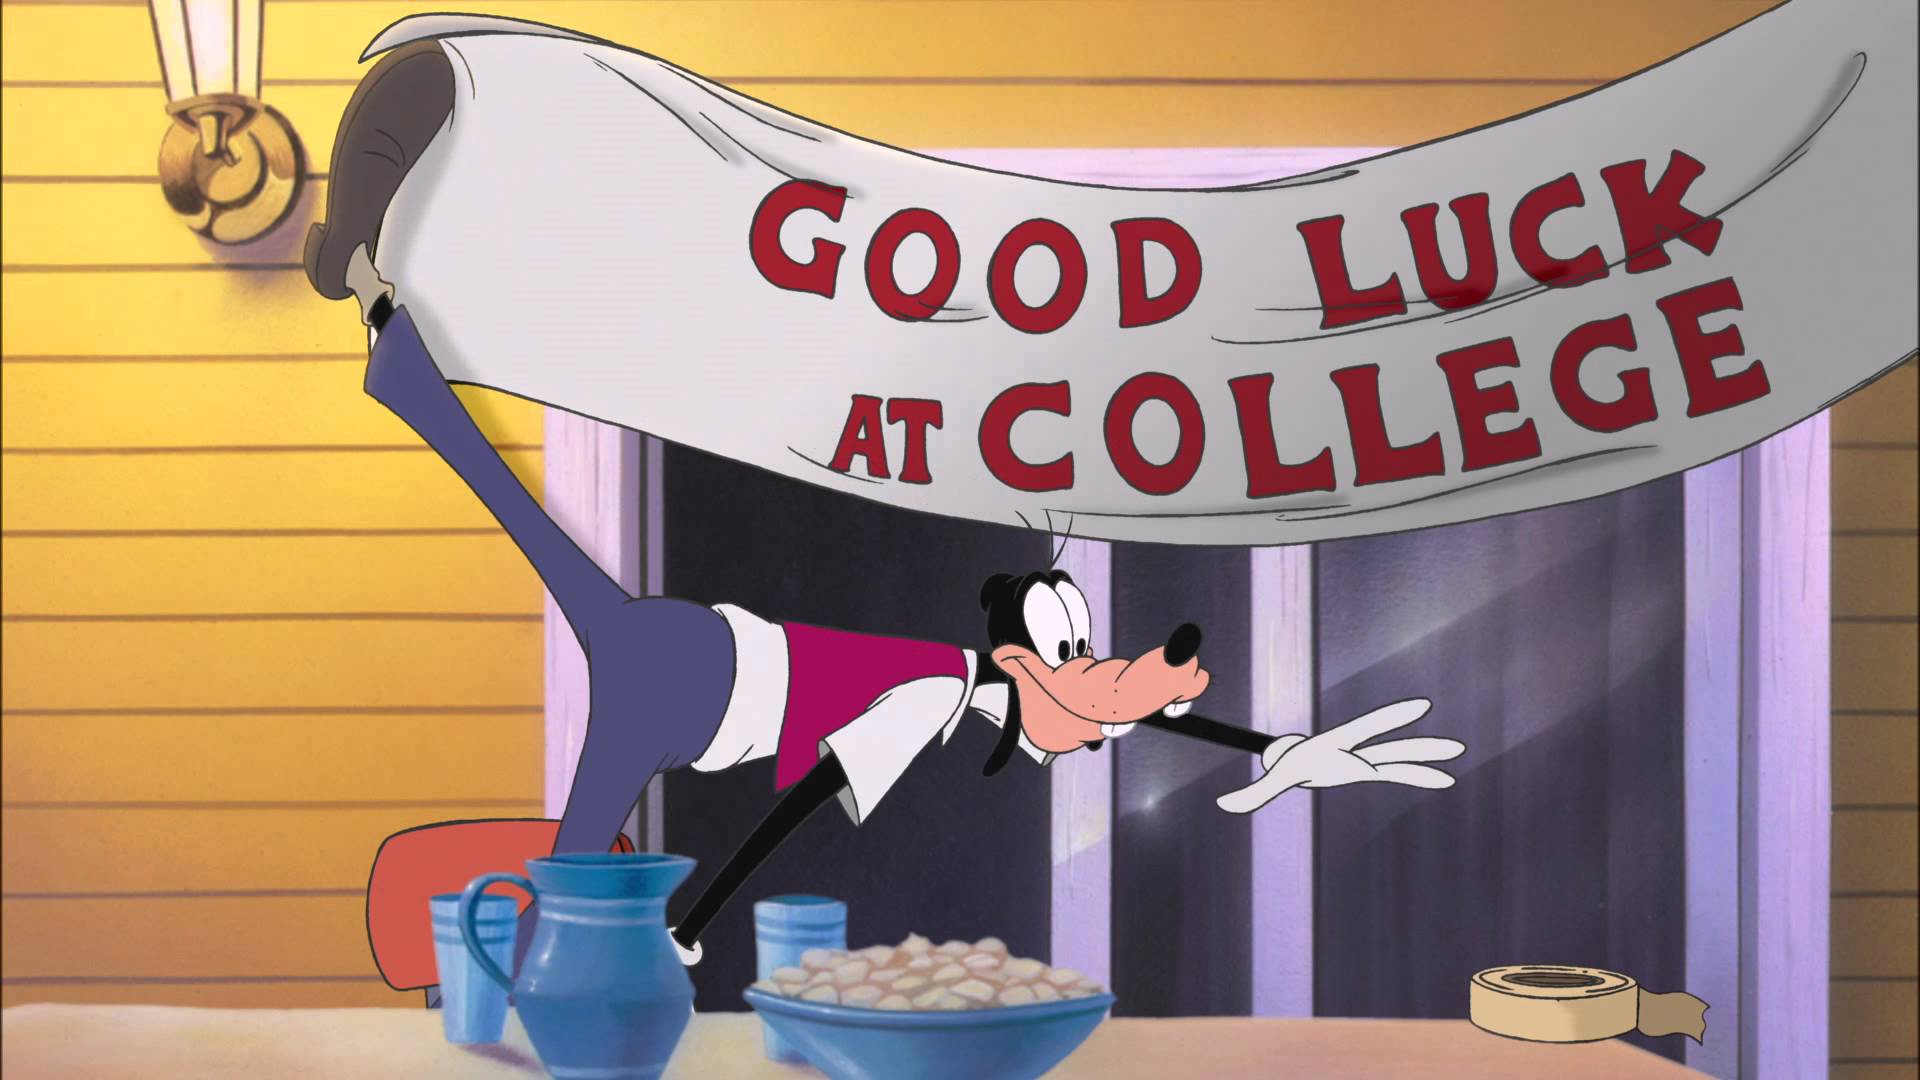 Mousterpiece Cinema, Episode 247: An Extremely Goofy Movie